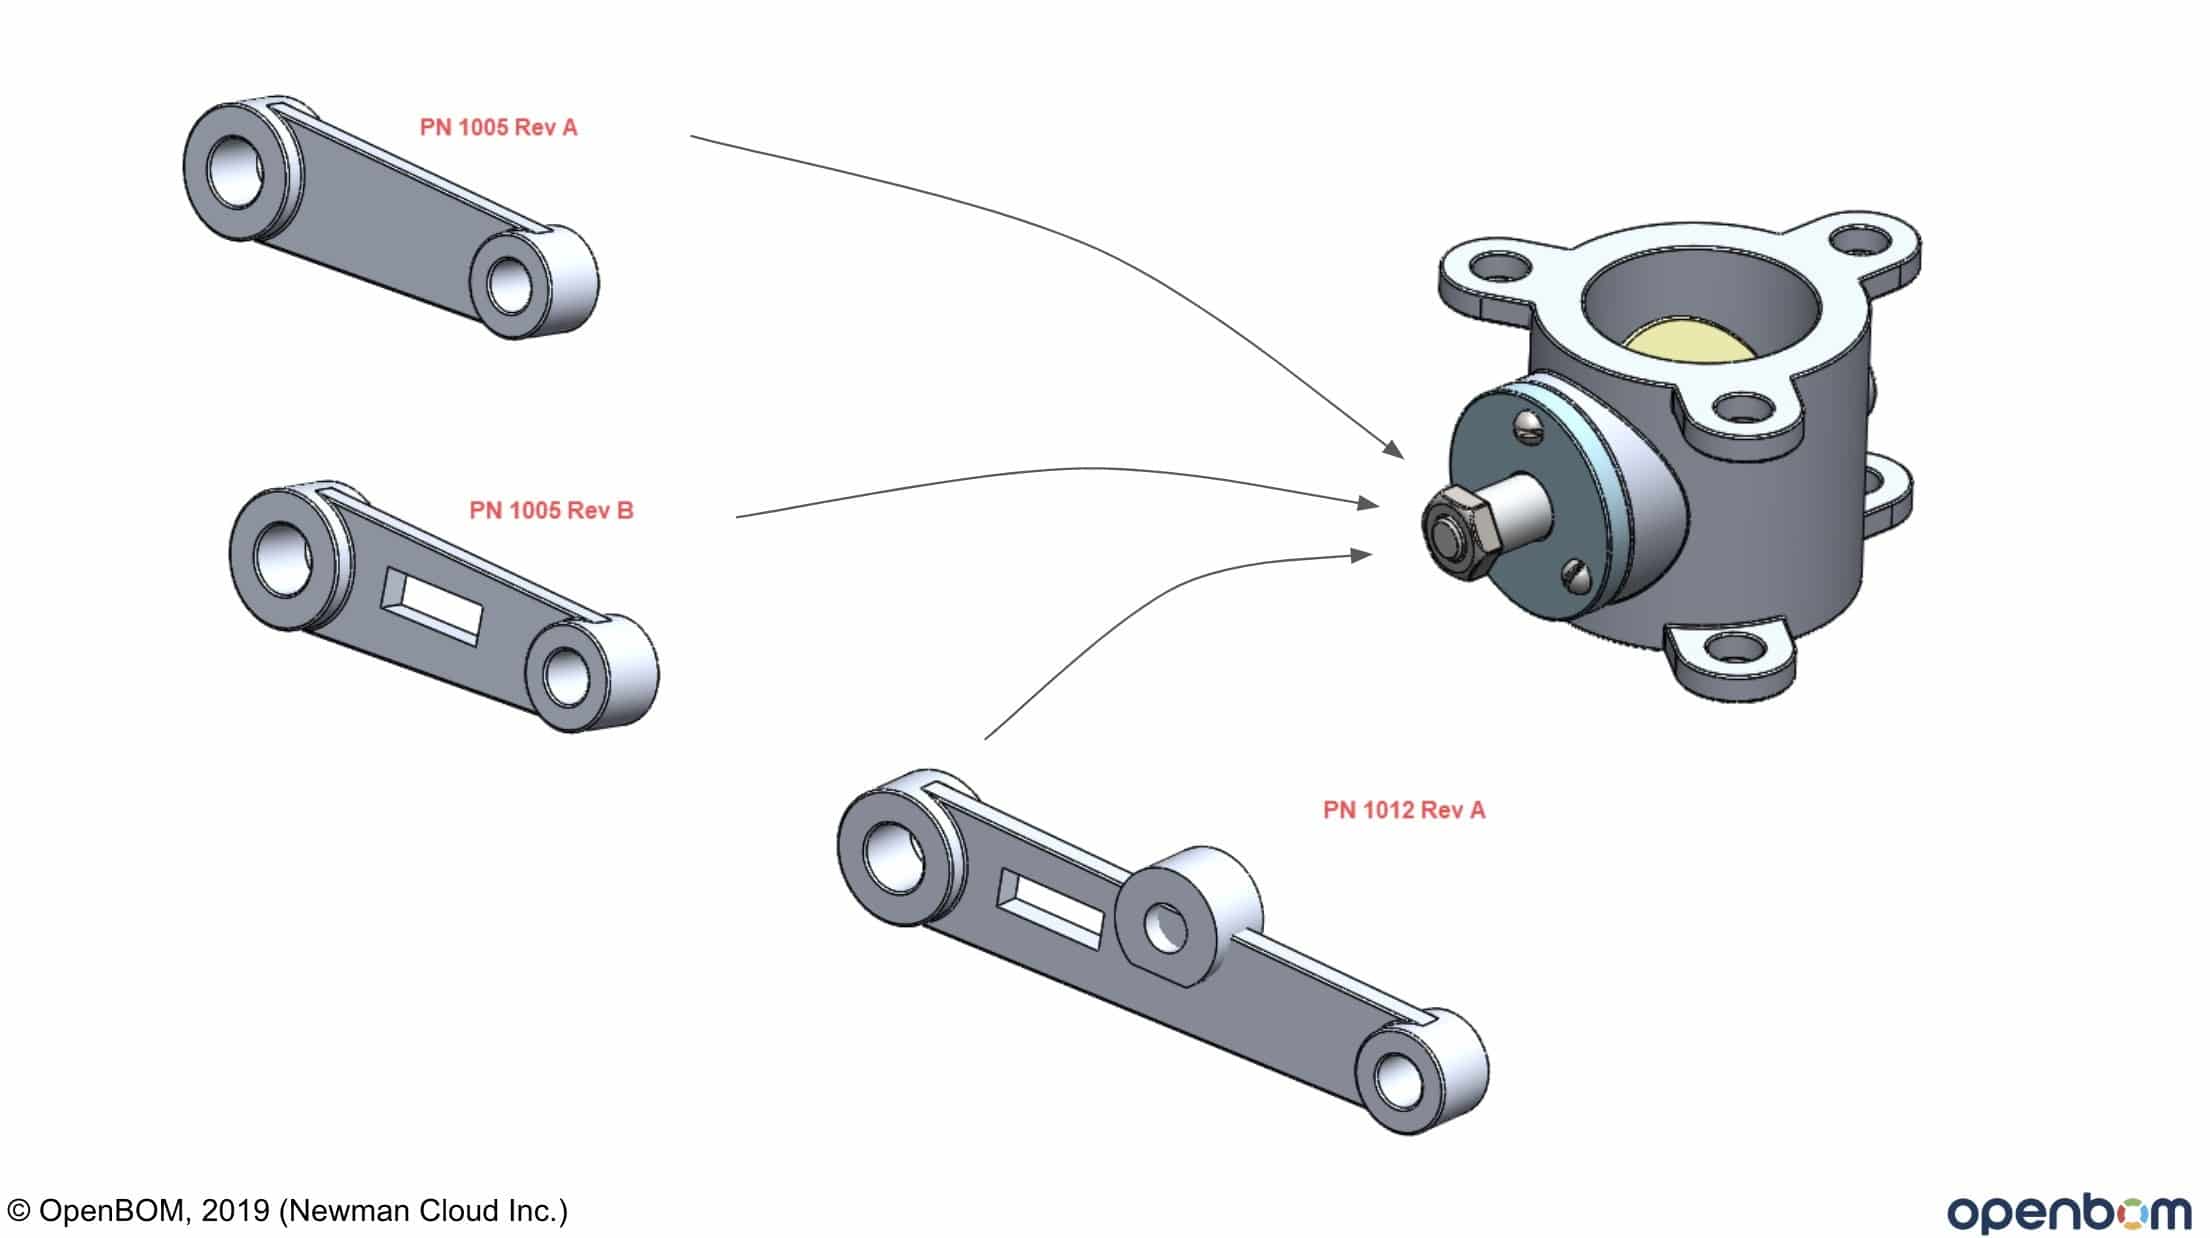 Interchangeable Parts – New Part Number or Revision?